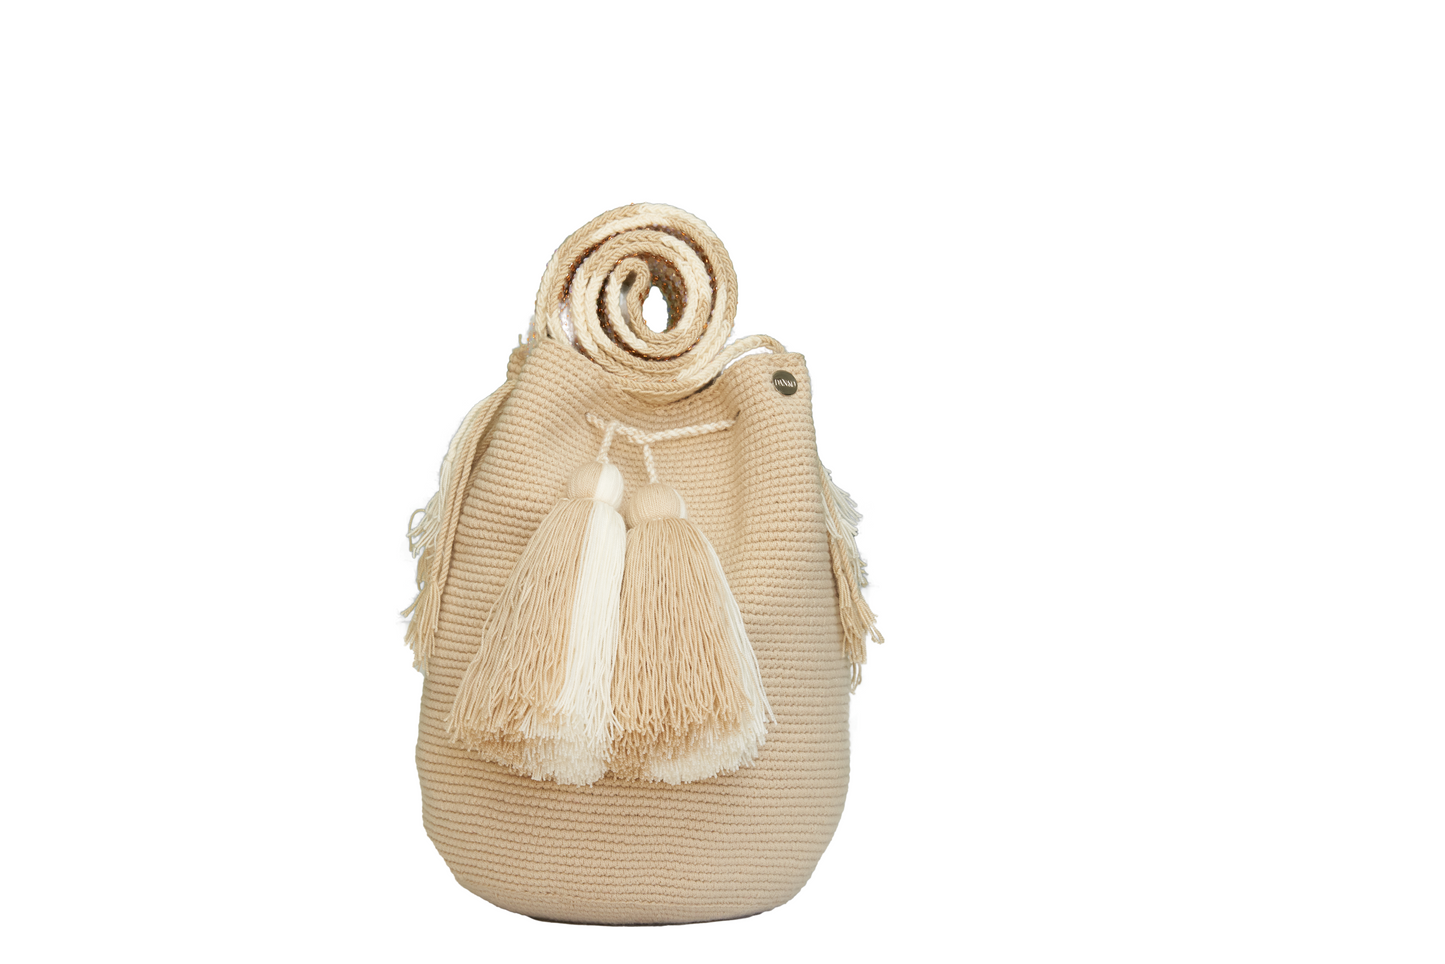 Handmade Beige and White Handbag with gold and silver Gems on the Handel. The bag has 2 tassels in cream and white